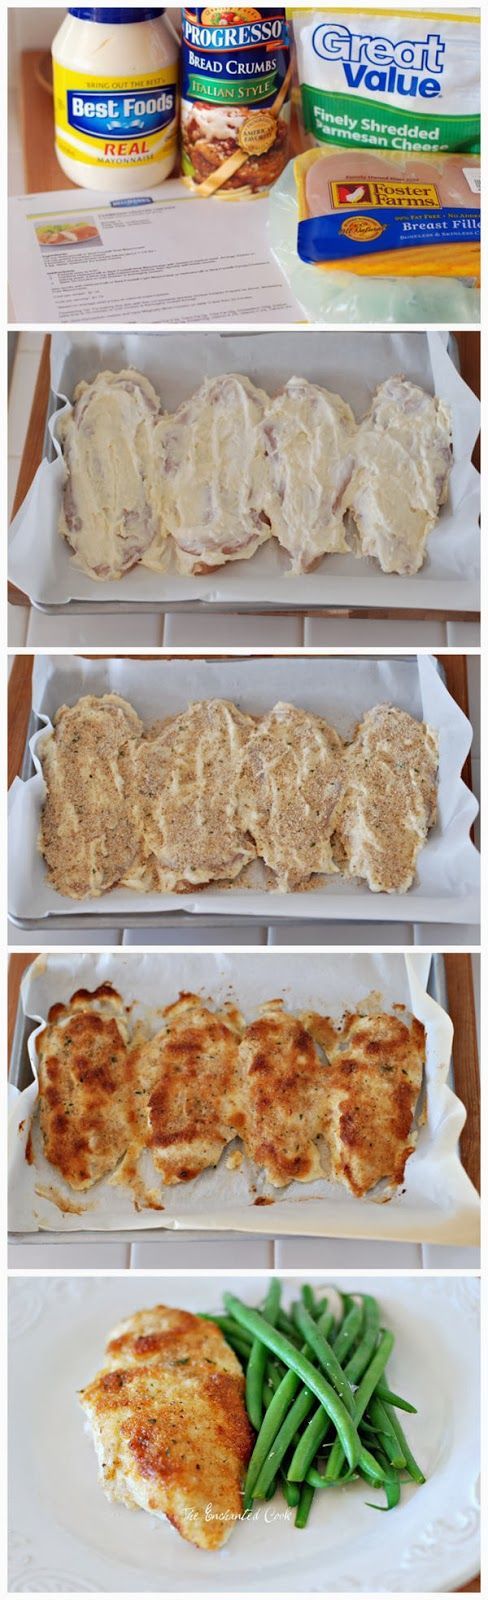 Parmesan Crusted Chicken—- my mod